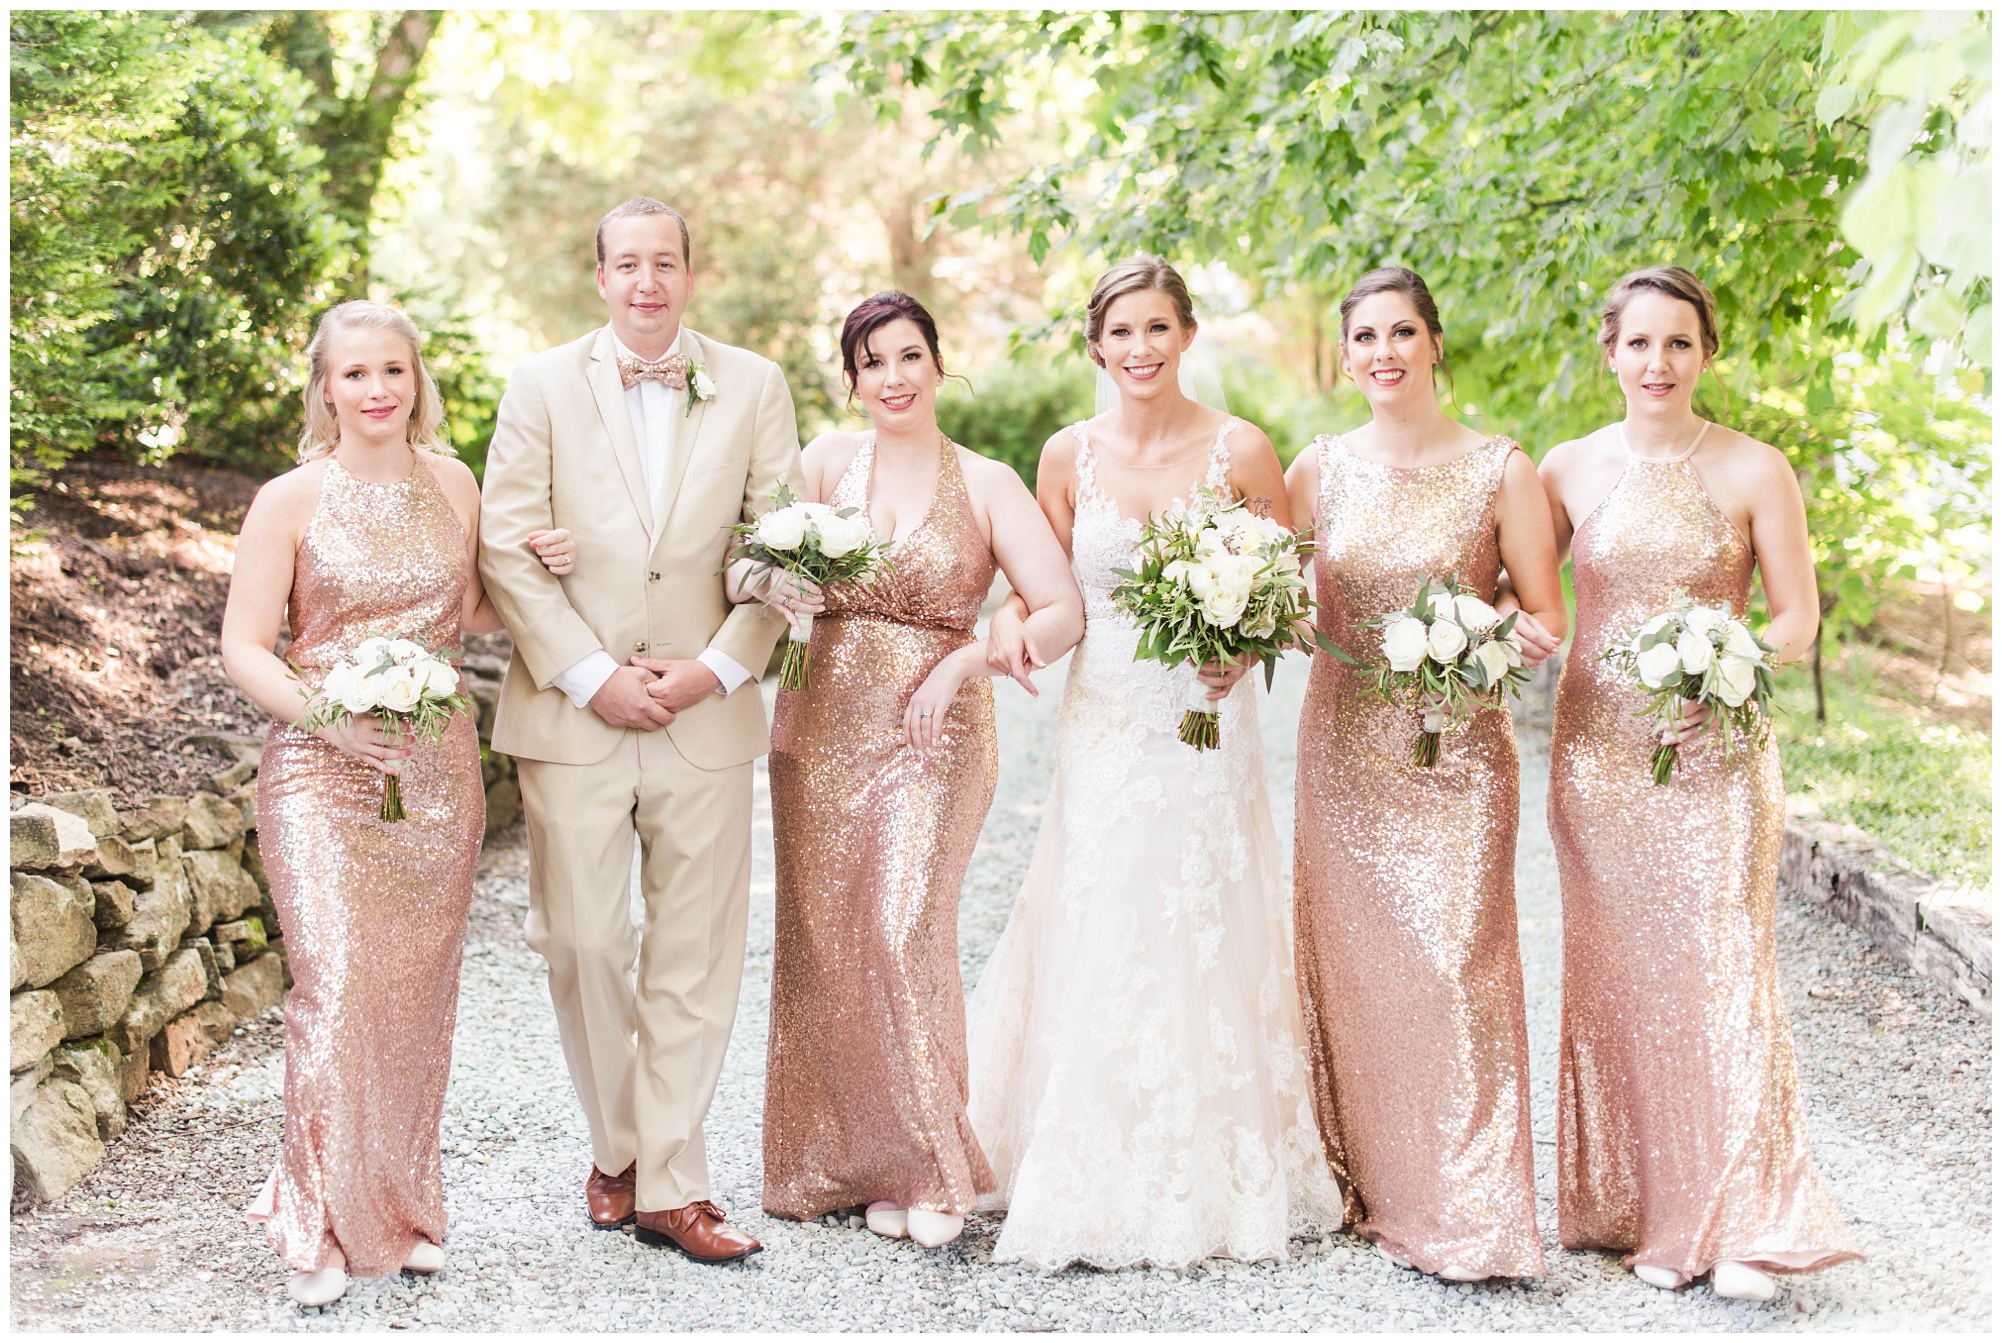  Rose Gold & Greenery Wedding at The Mill At Fine Creek Wedding | S&D Photography